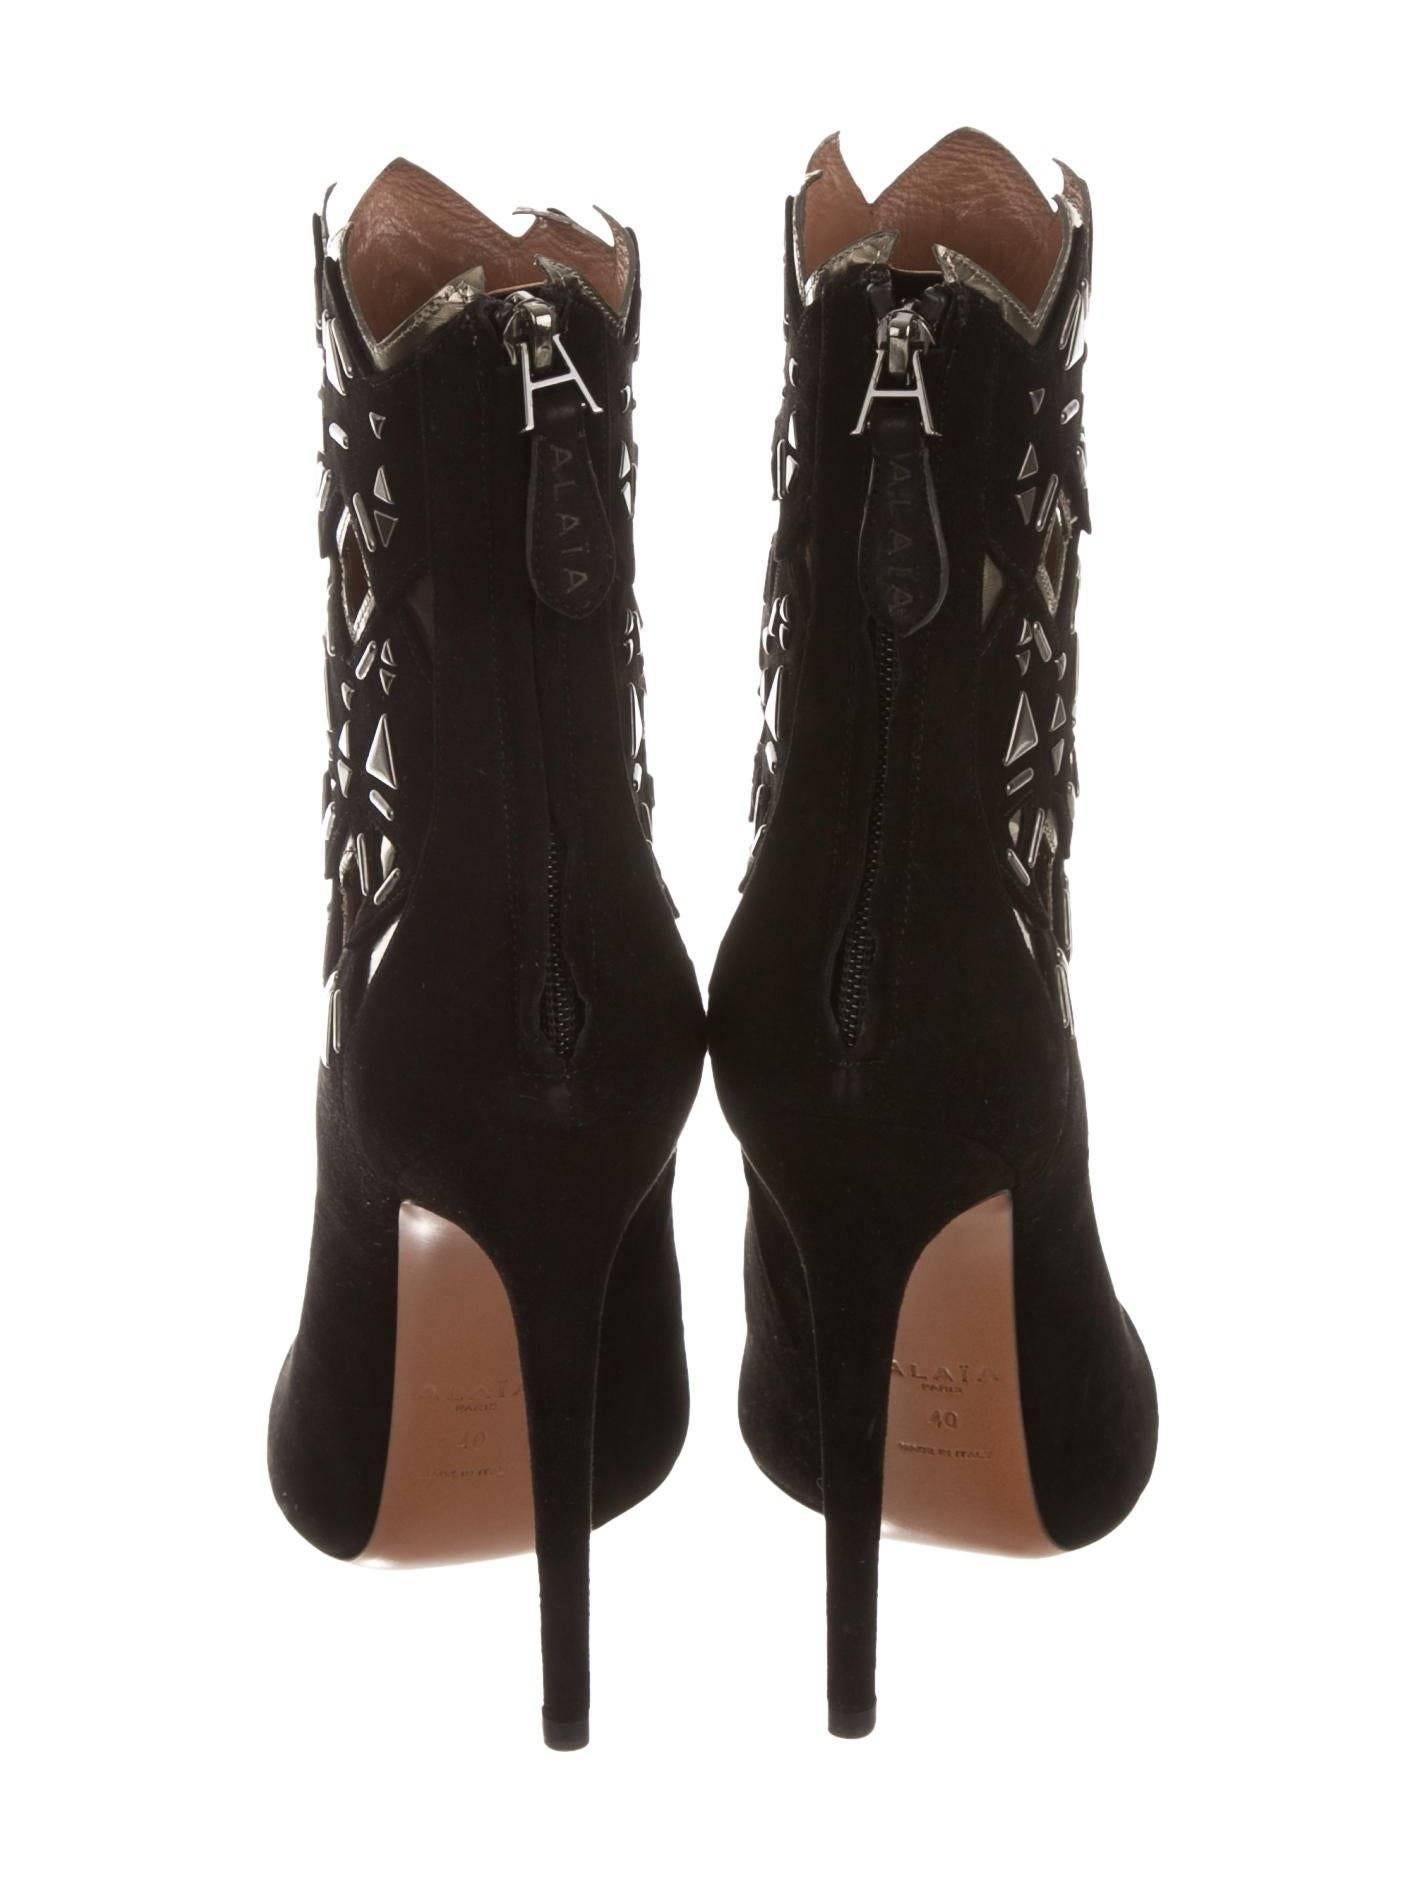 Alaia New Black Leather Metallic Laser Cut Out Evening Ankle Boots Heels in Box In New Condition In Chicago, IL